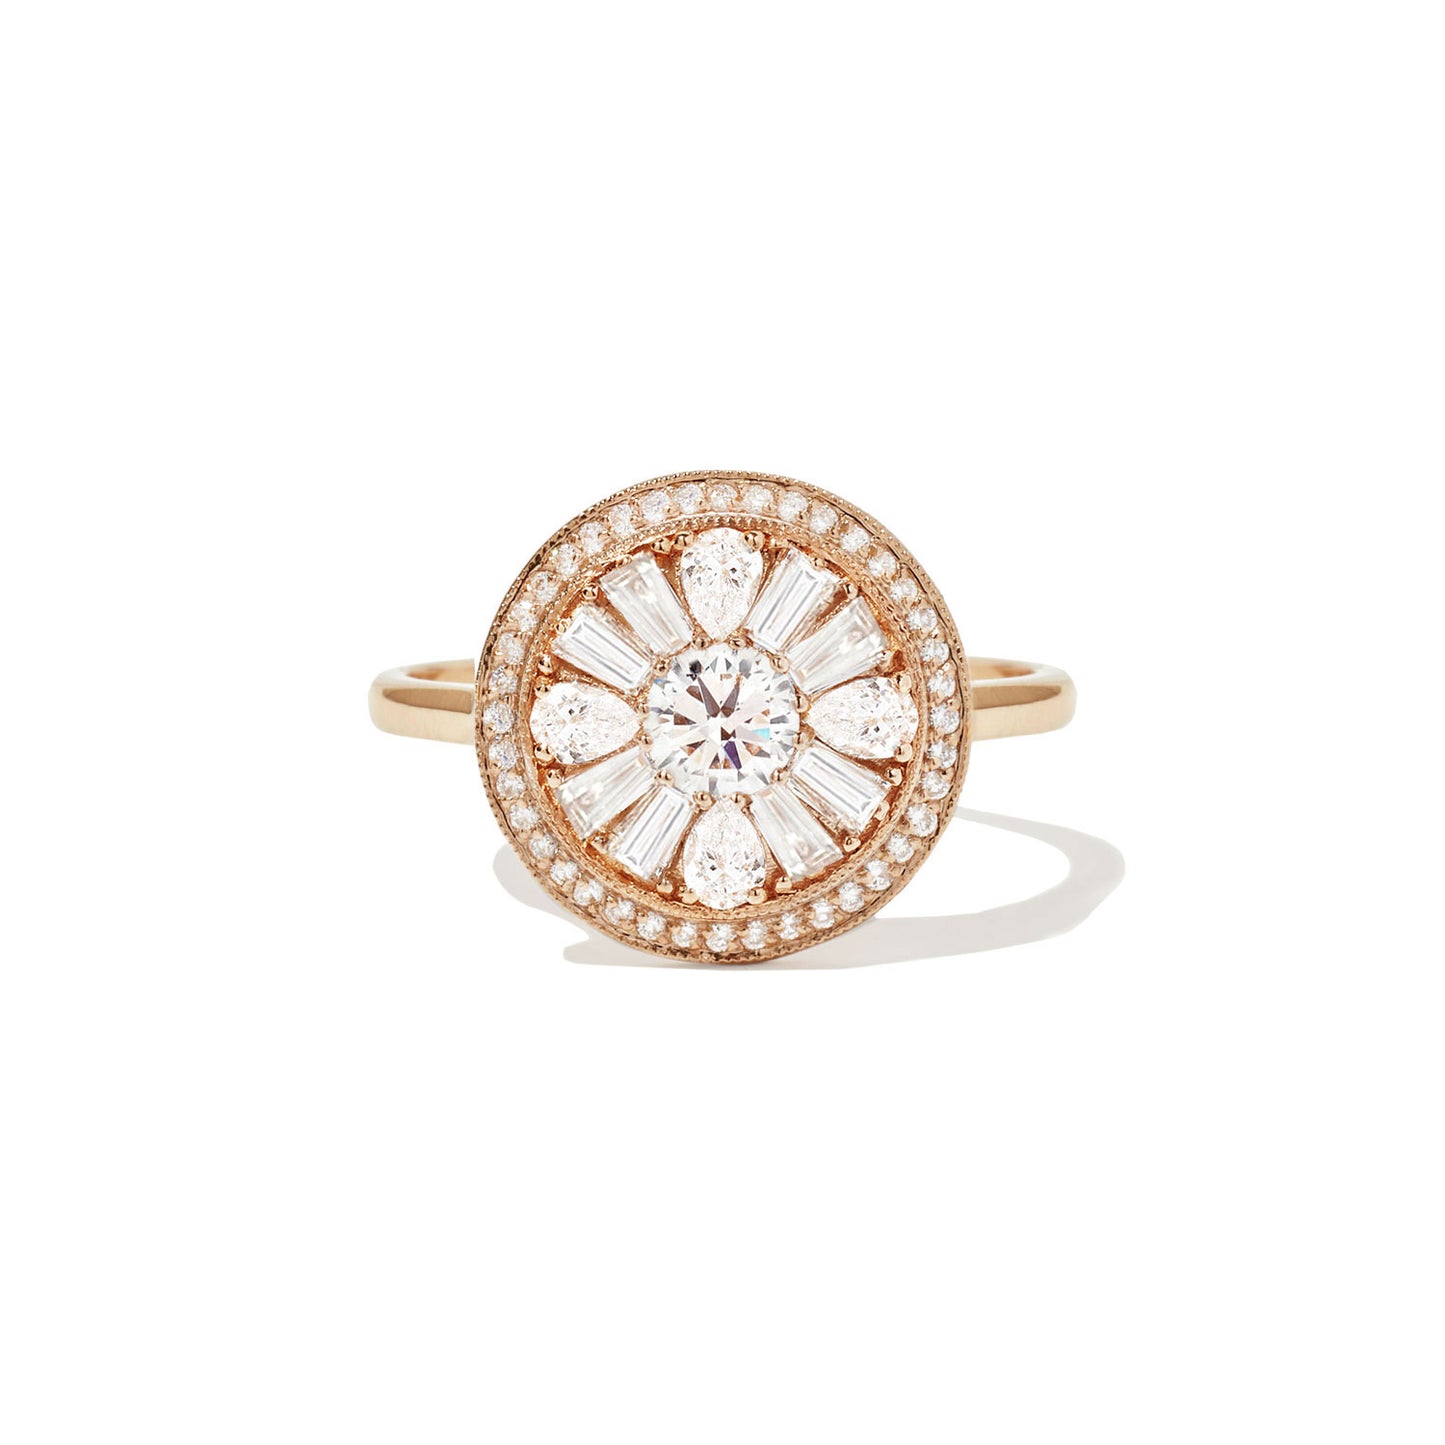 Louis Vuitton Blossom Open Ring, Pink Gold and Diamonds - Jewelry